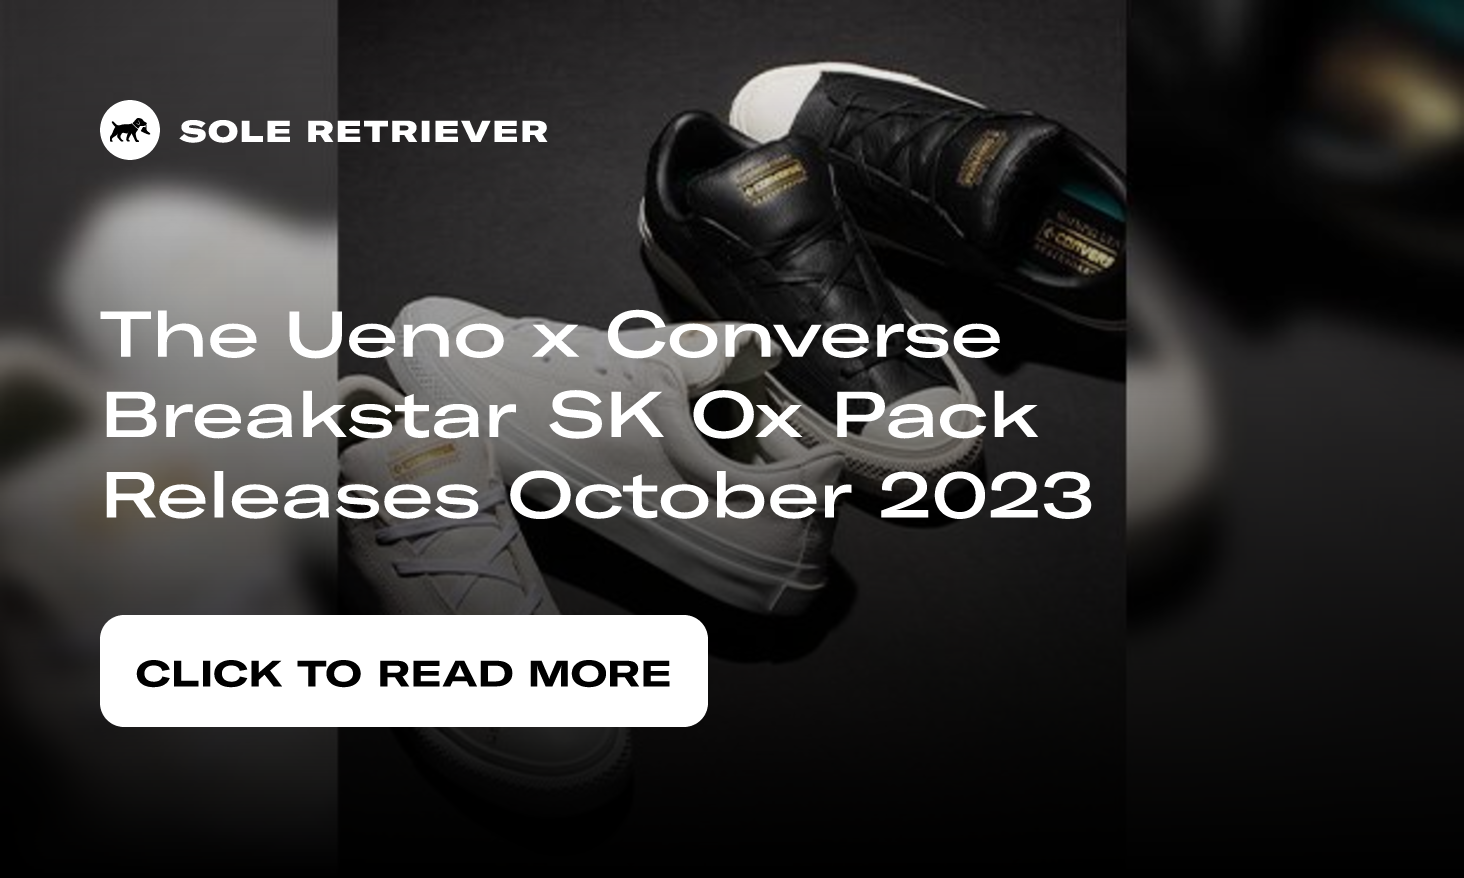 The Ueno x Converse Breakstar SK Ox Pack Releases October 2023